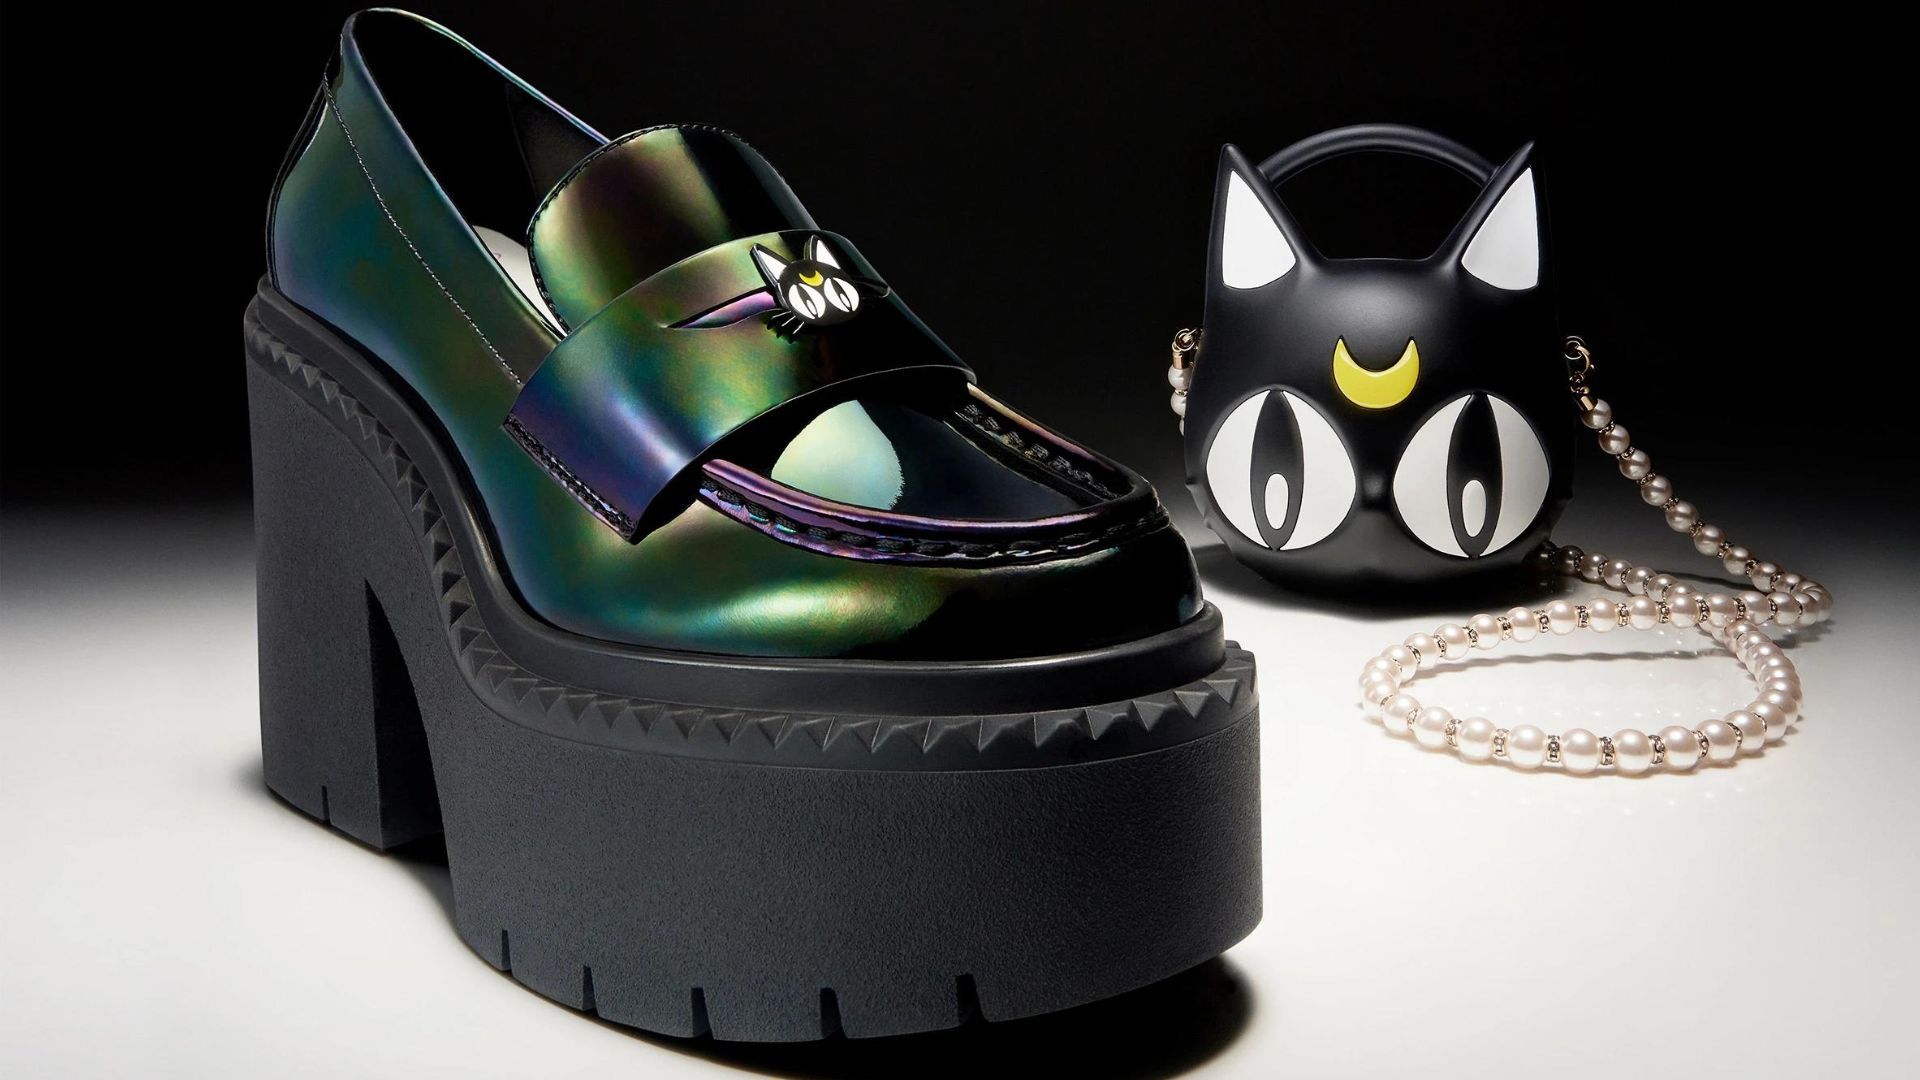 Jimmy Choos launches a collection in honor of Sailor Moon - Polygon